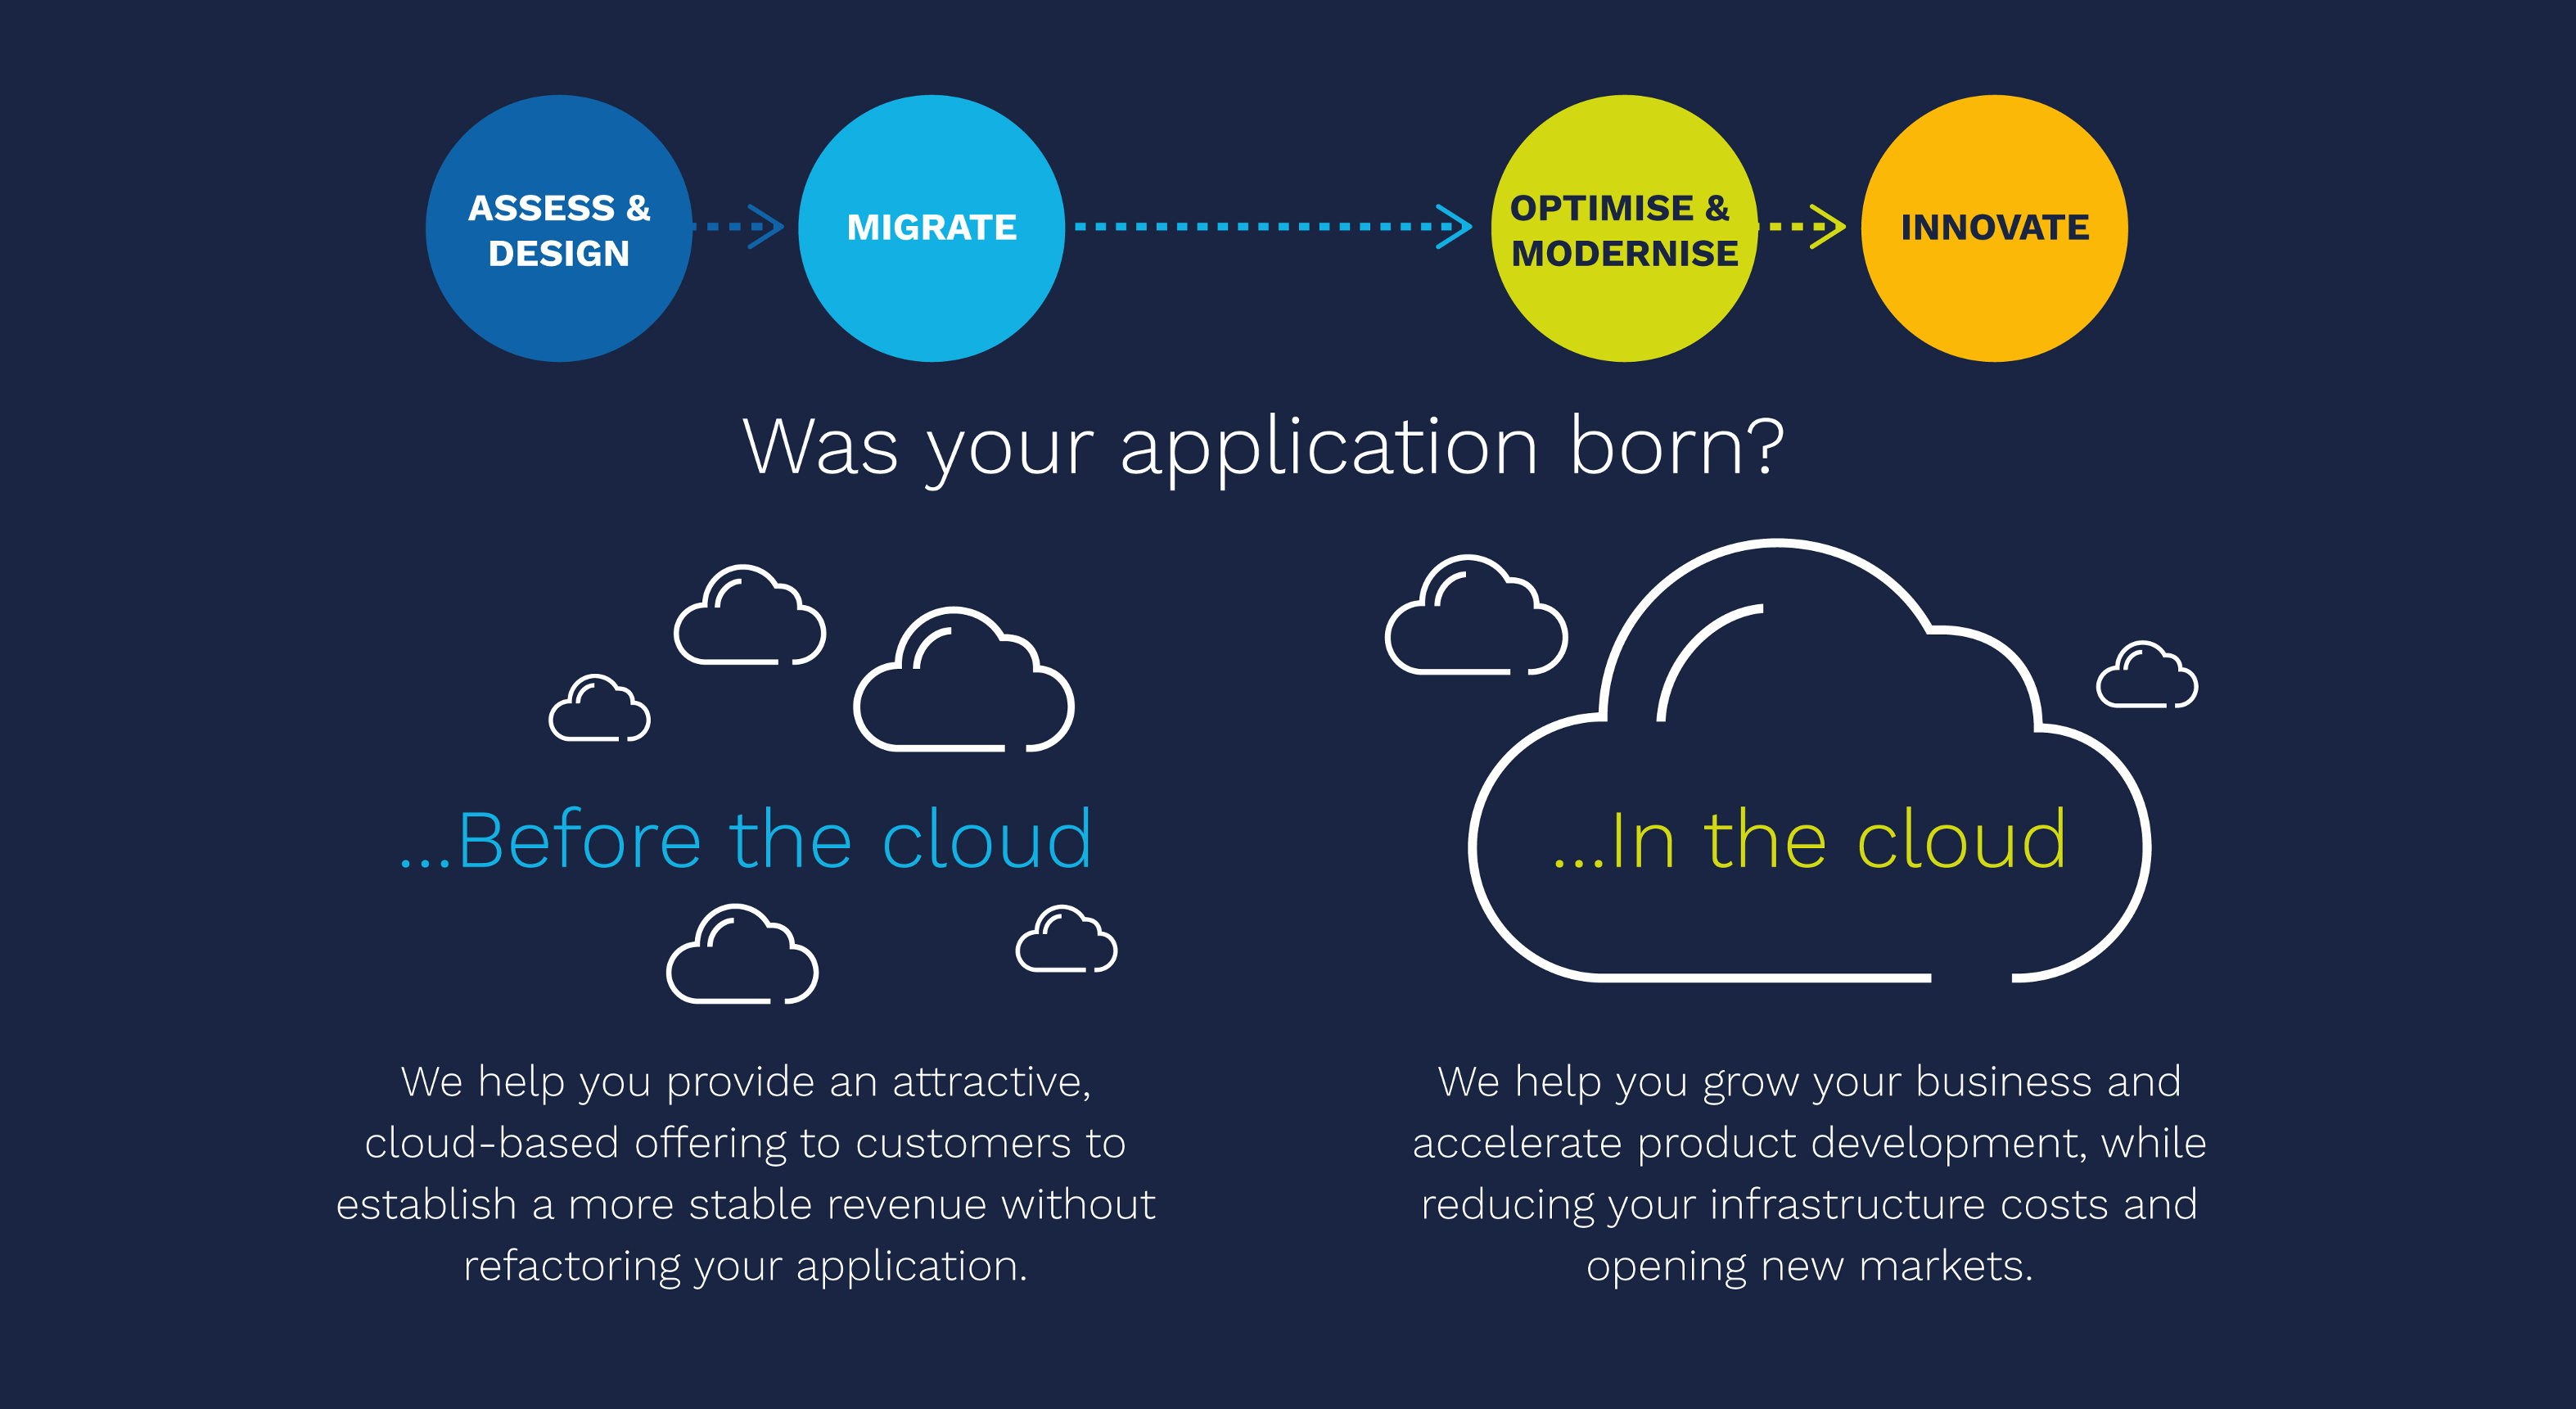 Born before the cloud or in the cloud?